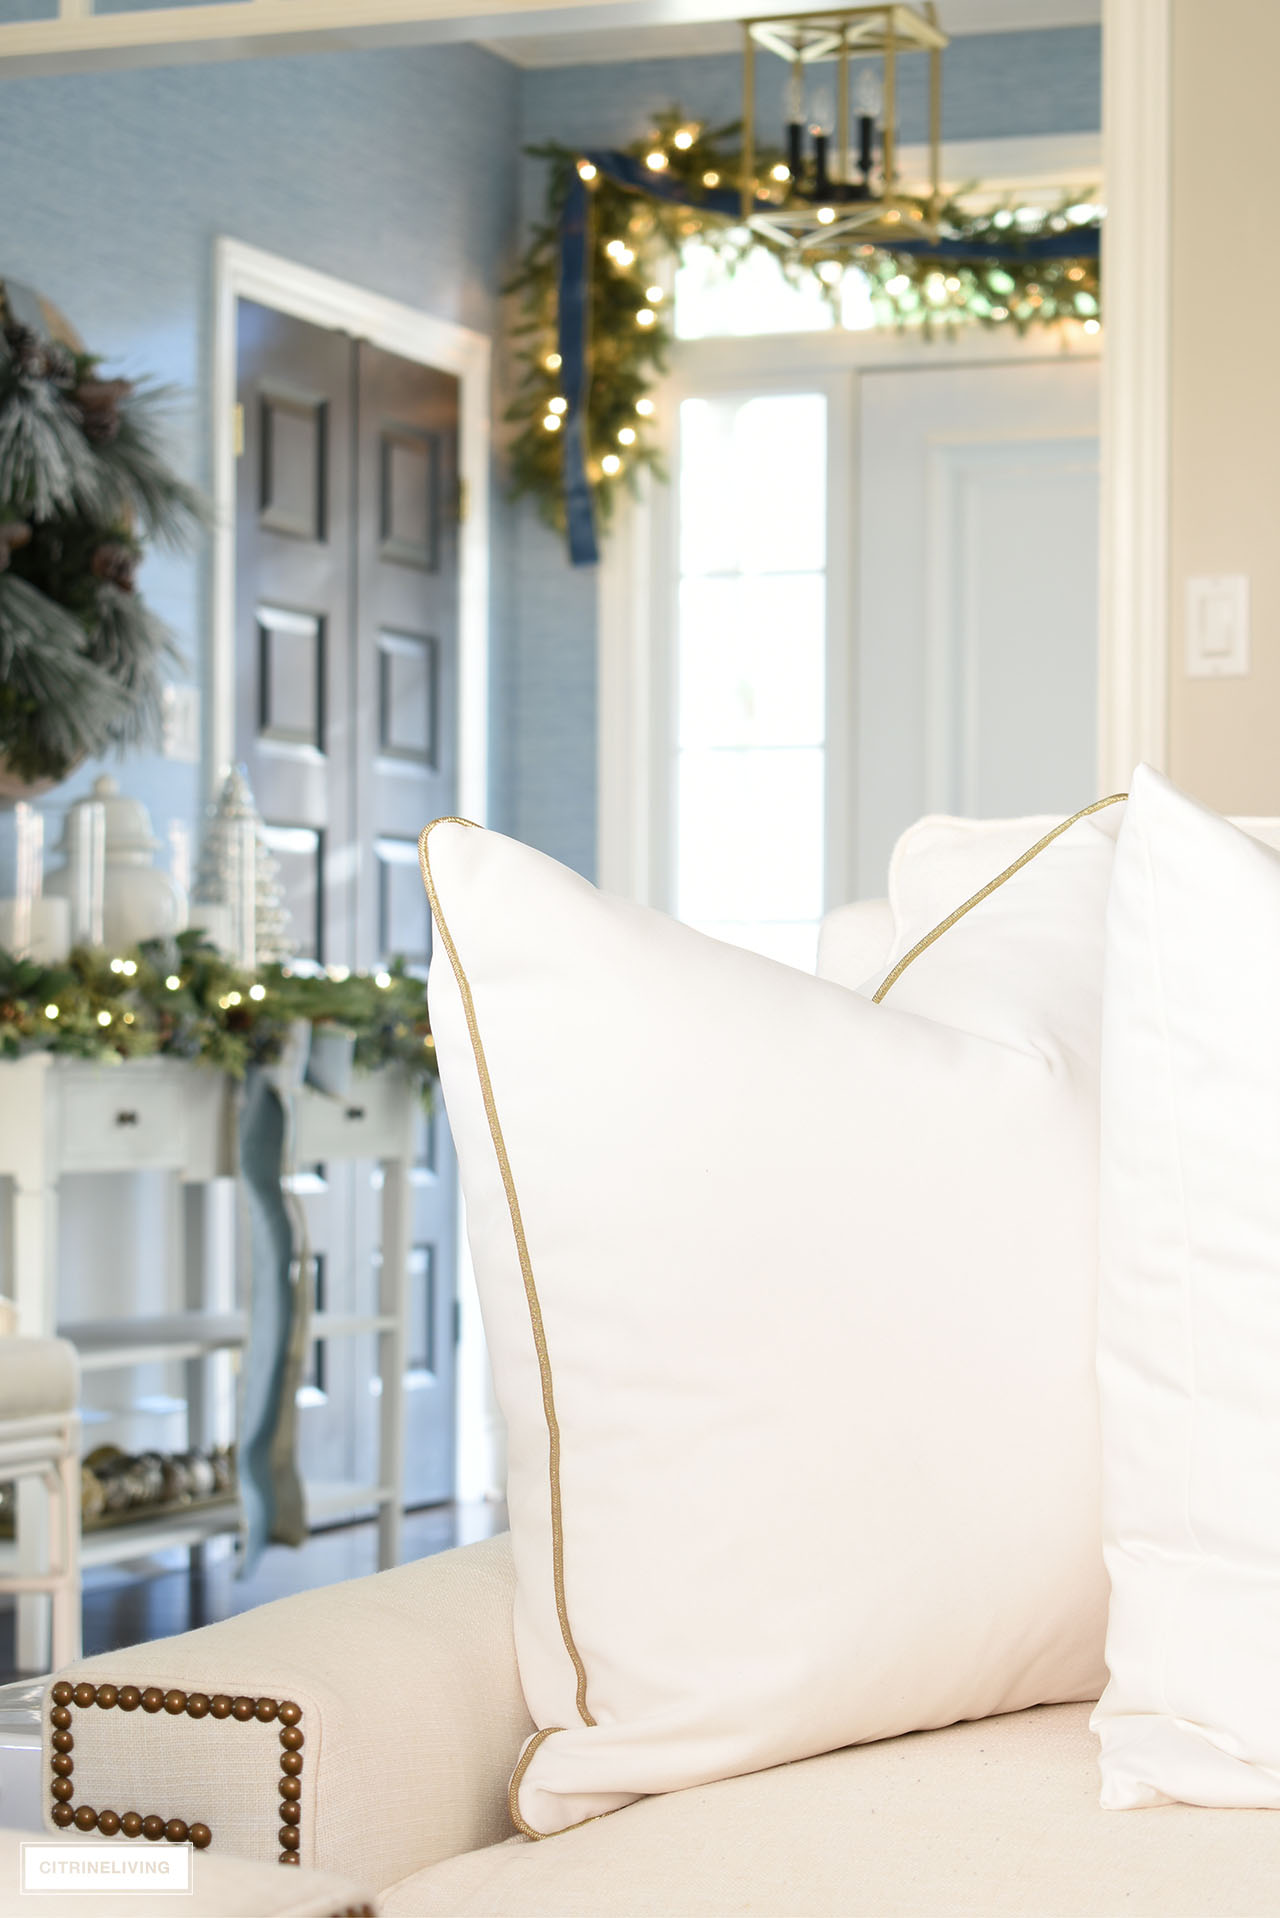 White velvet pillow with gold piping detail on a white sofa. Christmas garland hangs in the entryway in the background.